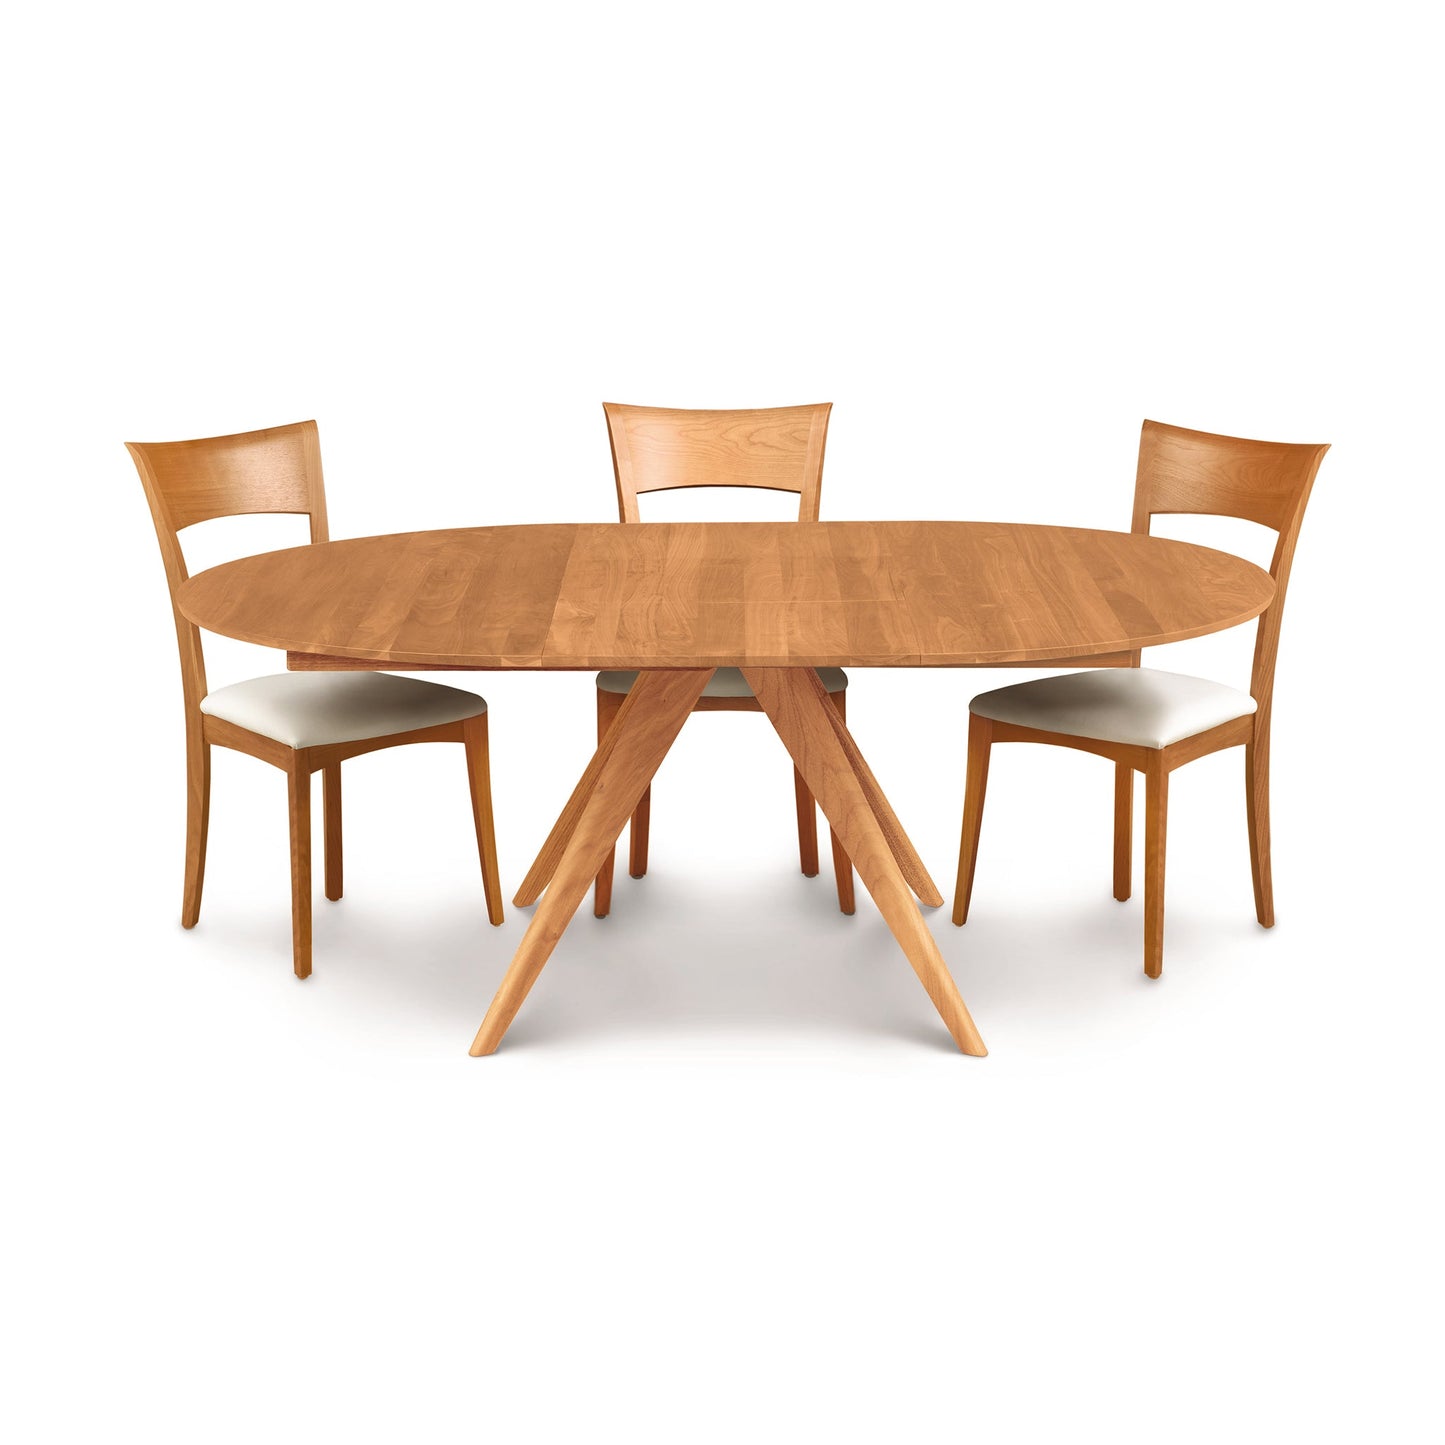 A wooden dining table with four chairs.